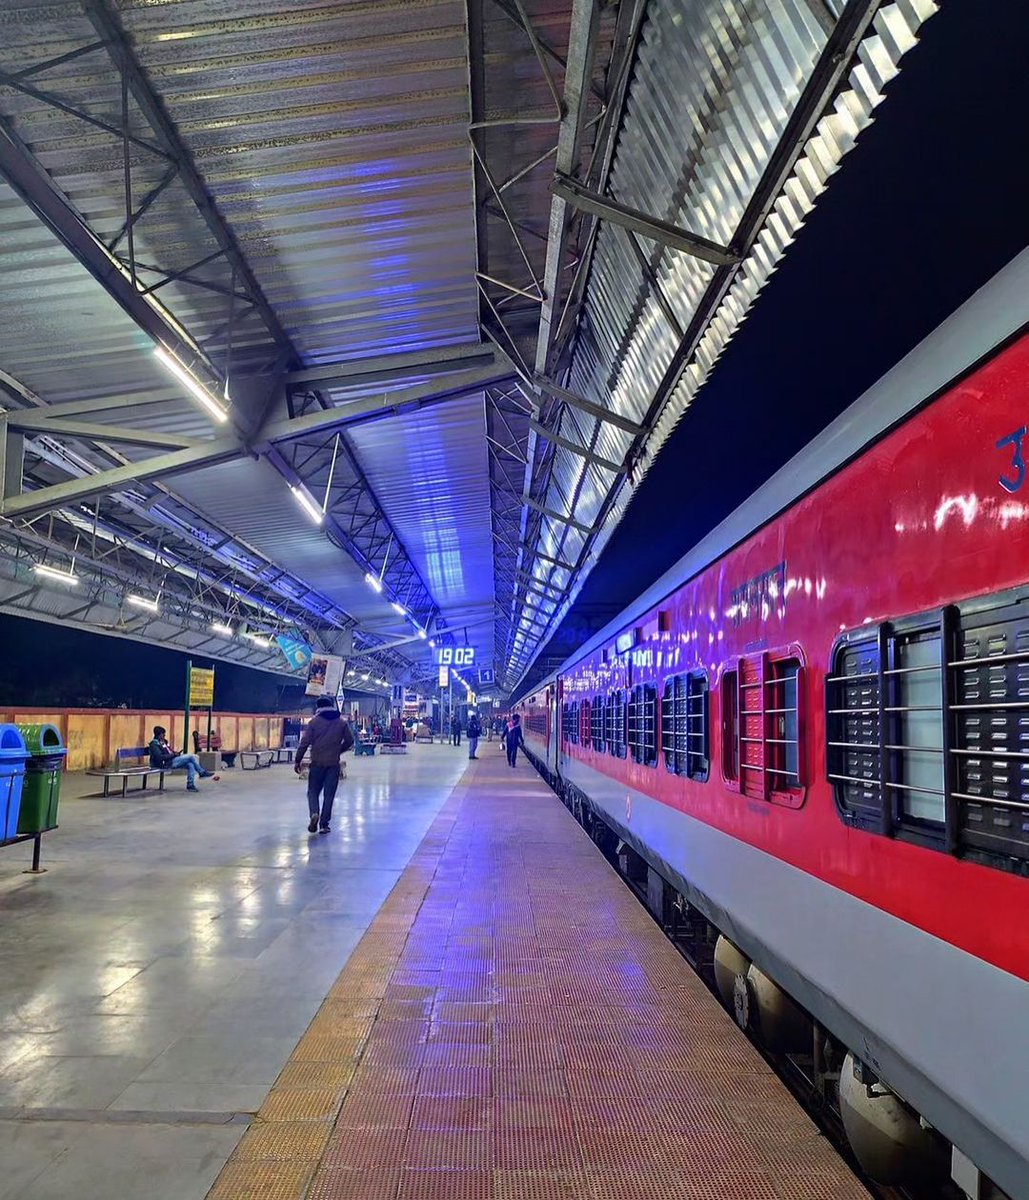 Which Indian State doesn't have Railway Station ?